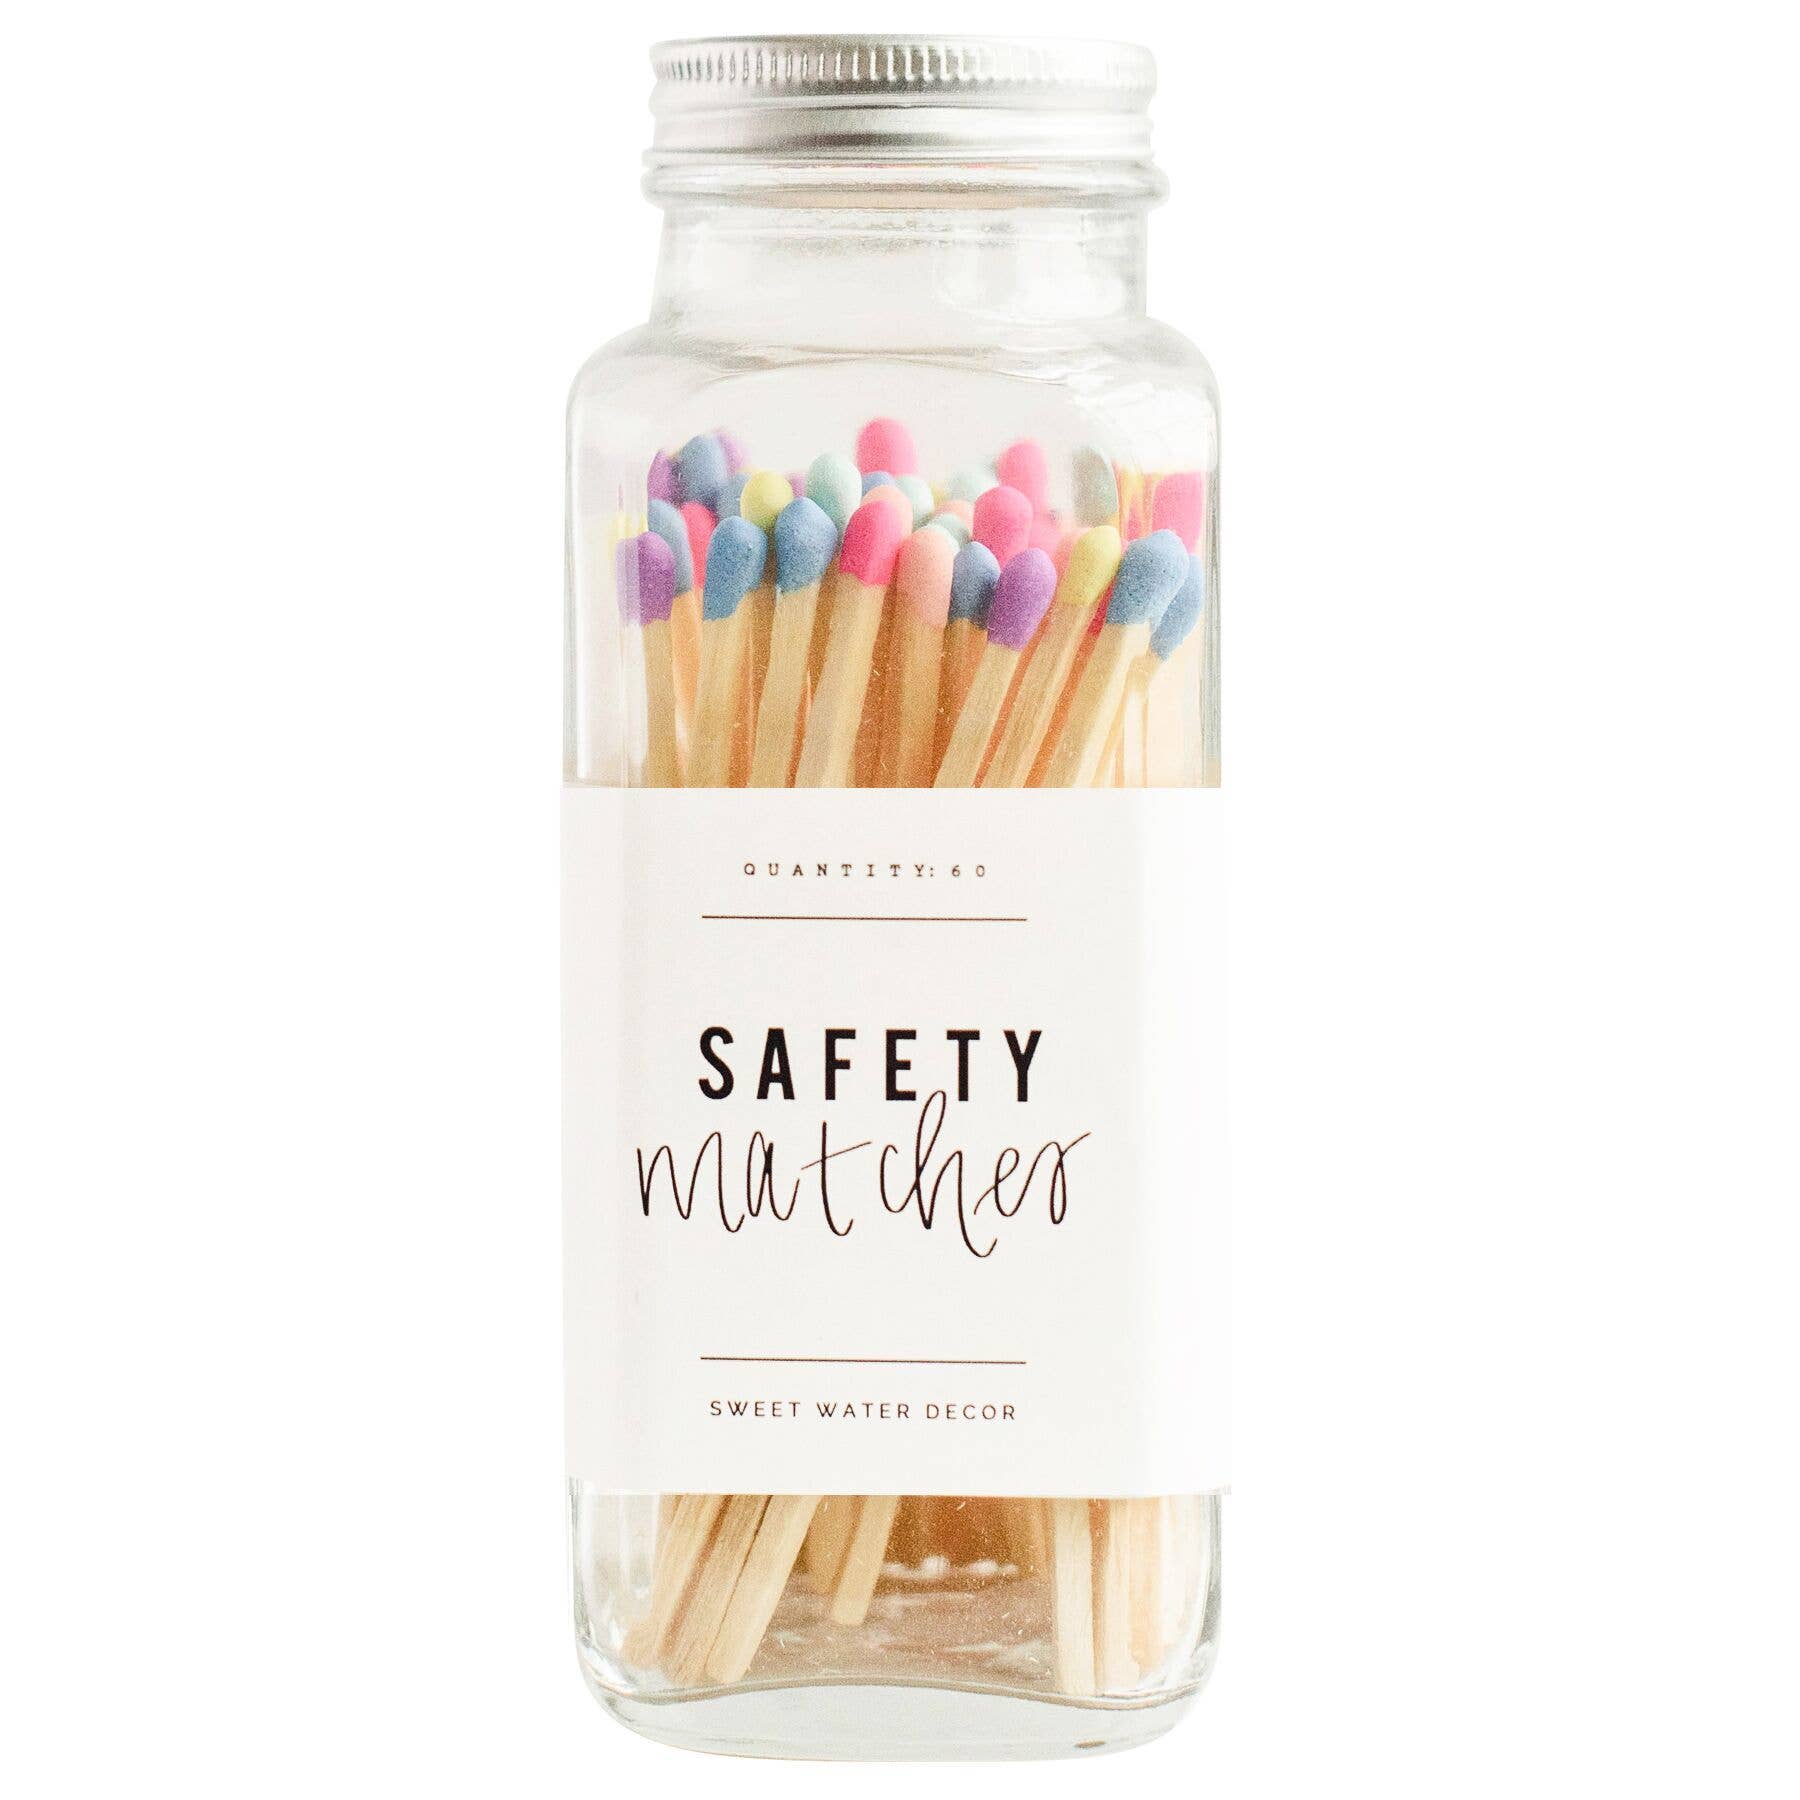 Sweet Water Decor - Safety Matches - Multicolor Rainbow Tip - 60 Count, 3.75" - Fenwick & OliverSweet Water Decor - Safety Matches - Multicolor Rainbow Tip - 60 Count, 3.75"Sweet Water DecorFenwick & OliverGM007